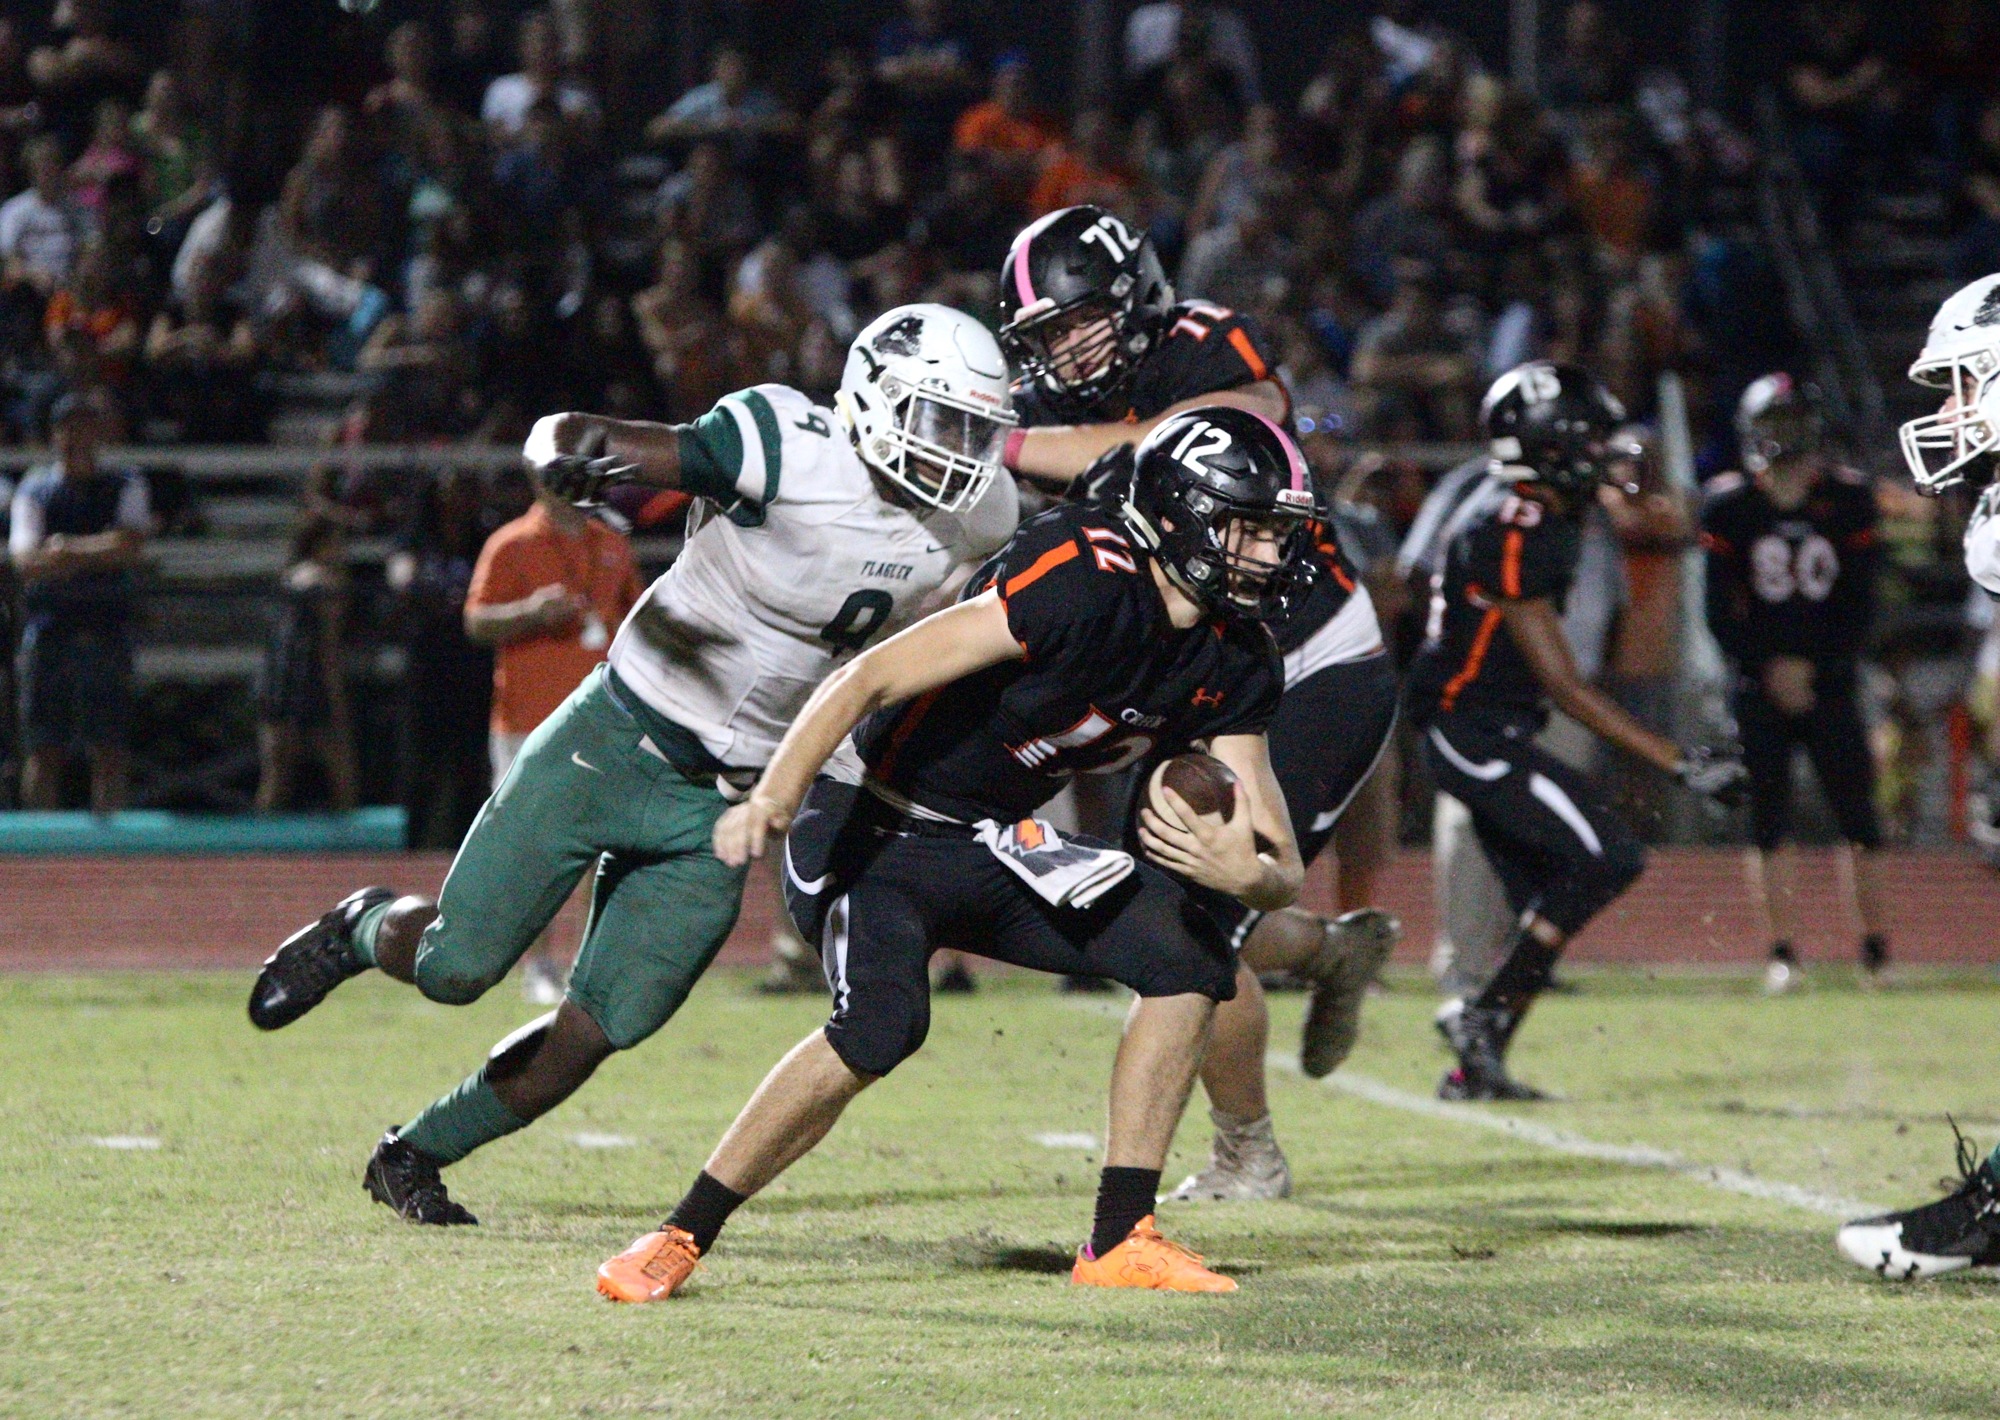 FPC defensive end Nelson Paul attempts to sack Spruce Creek quarterback Kyle Minckler in the fourth quarter. Photo by Ray Boone